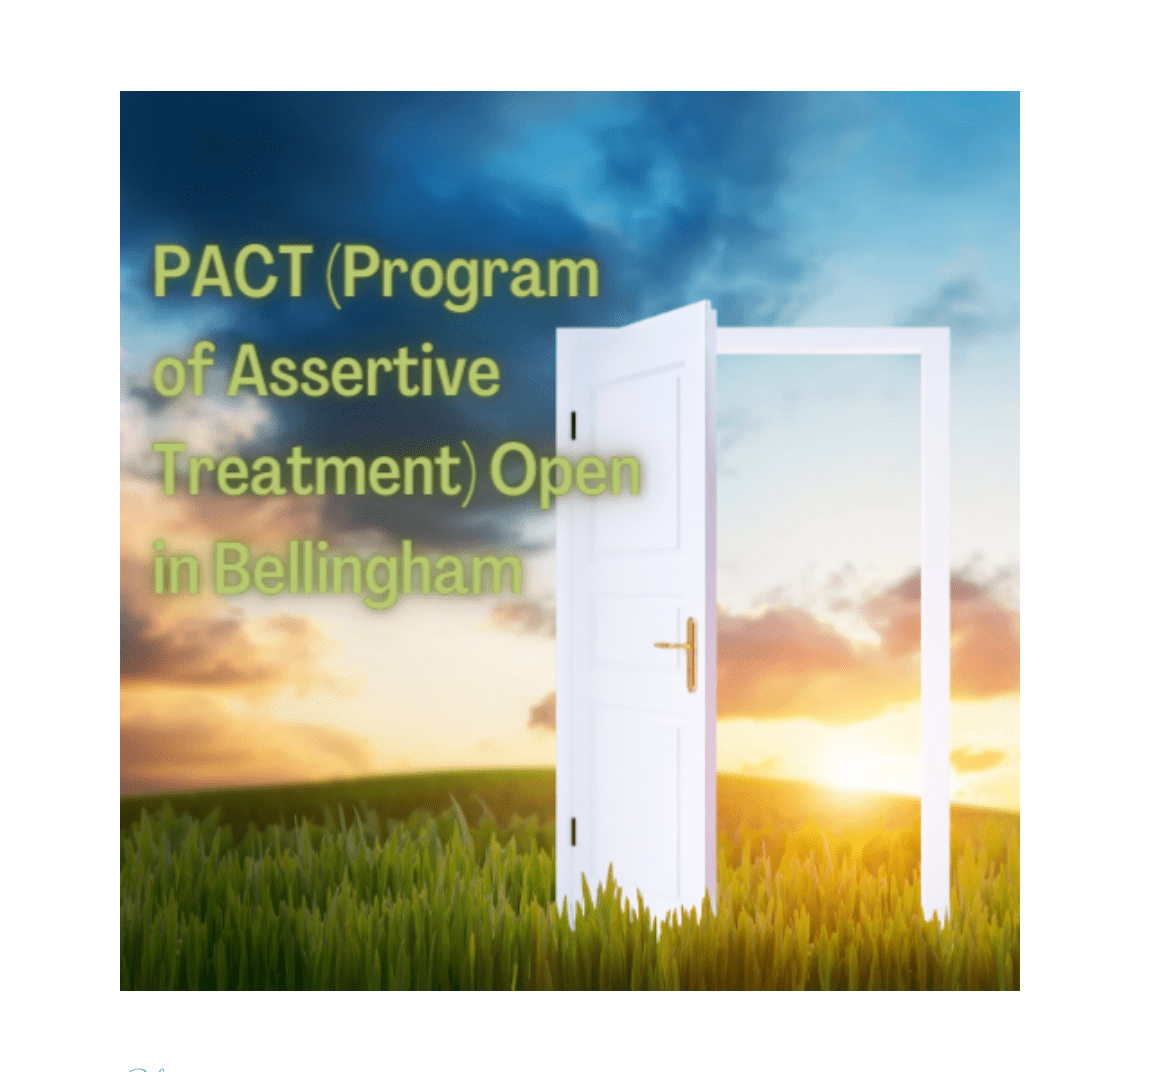 The words "PACT Program of Assertive Treatment Open in Bellingham" in yellow text over an image of a sunset with an open door